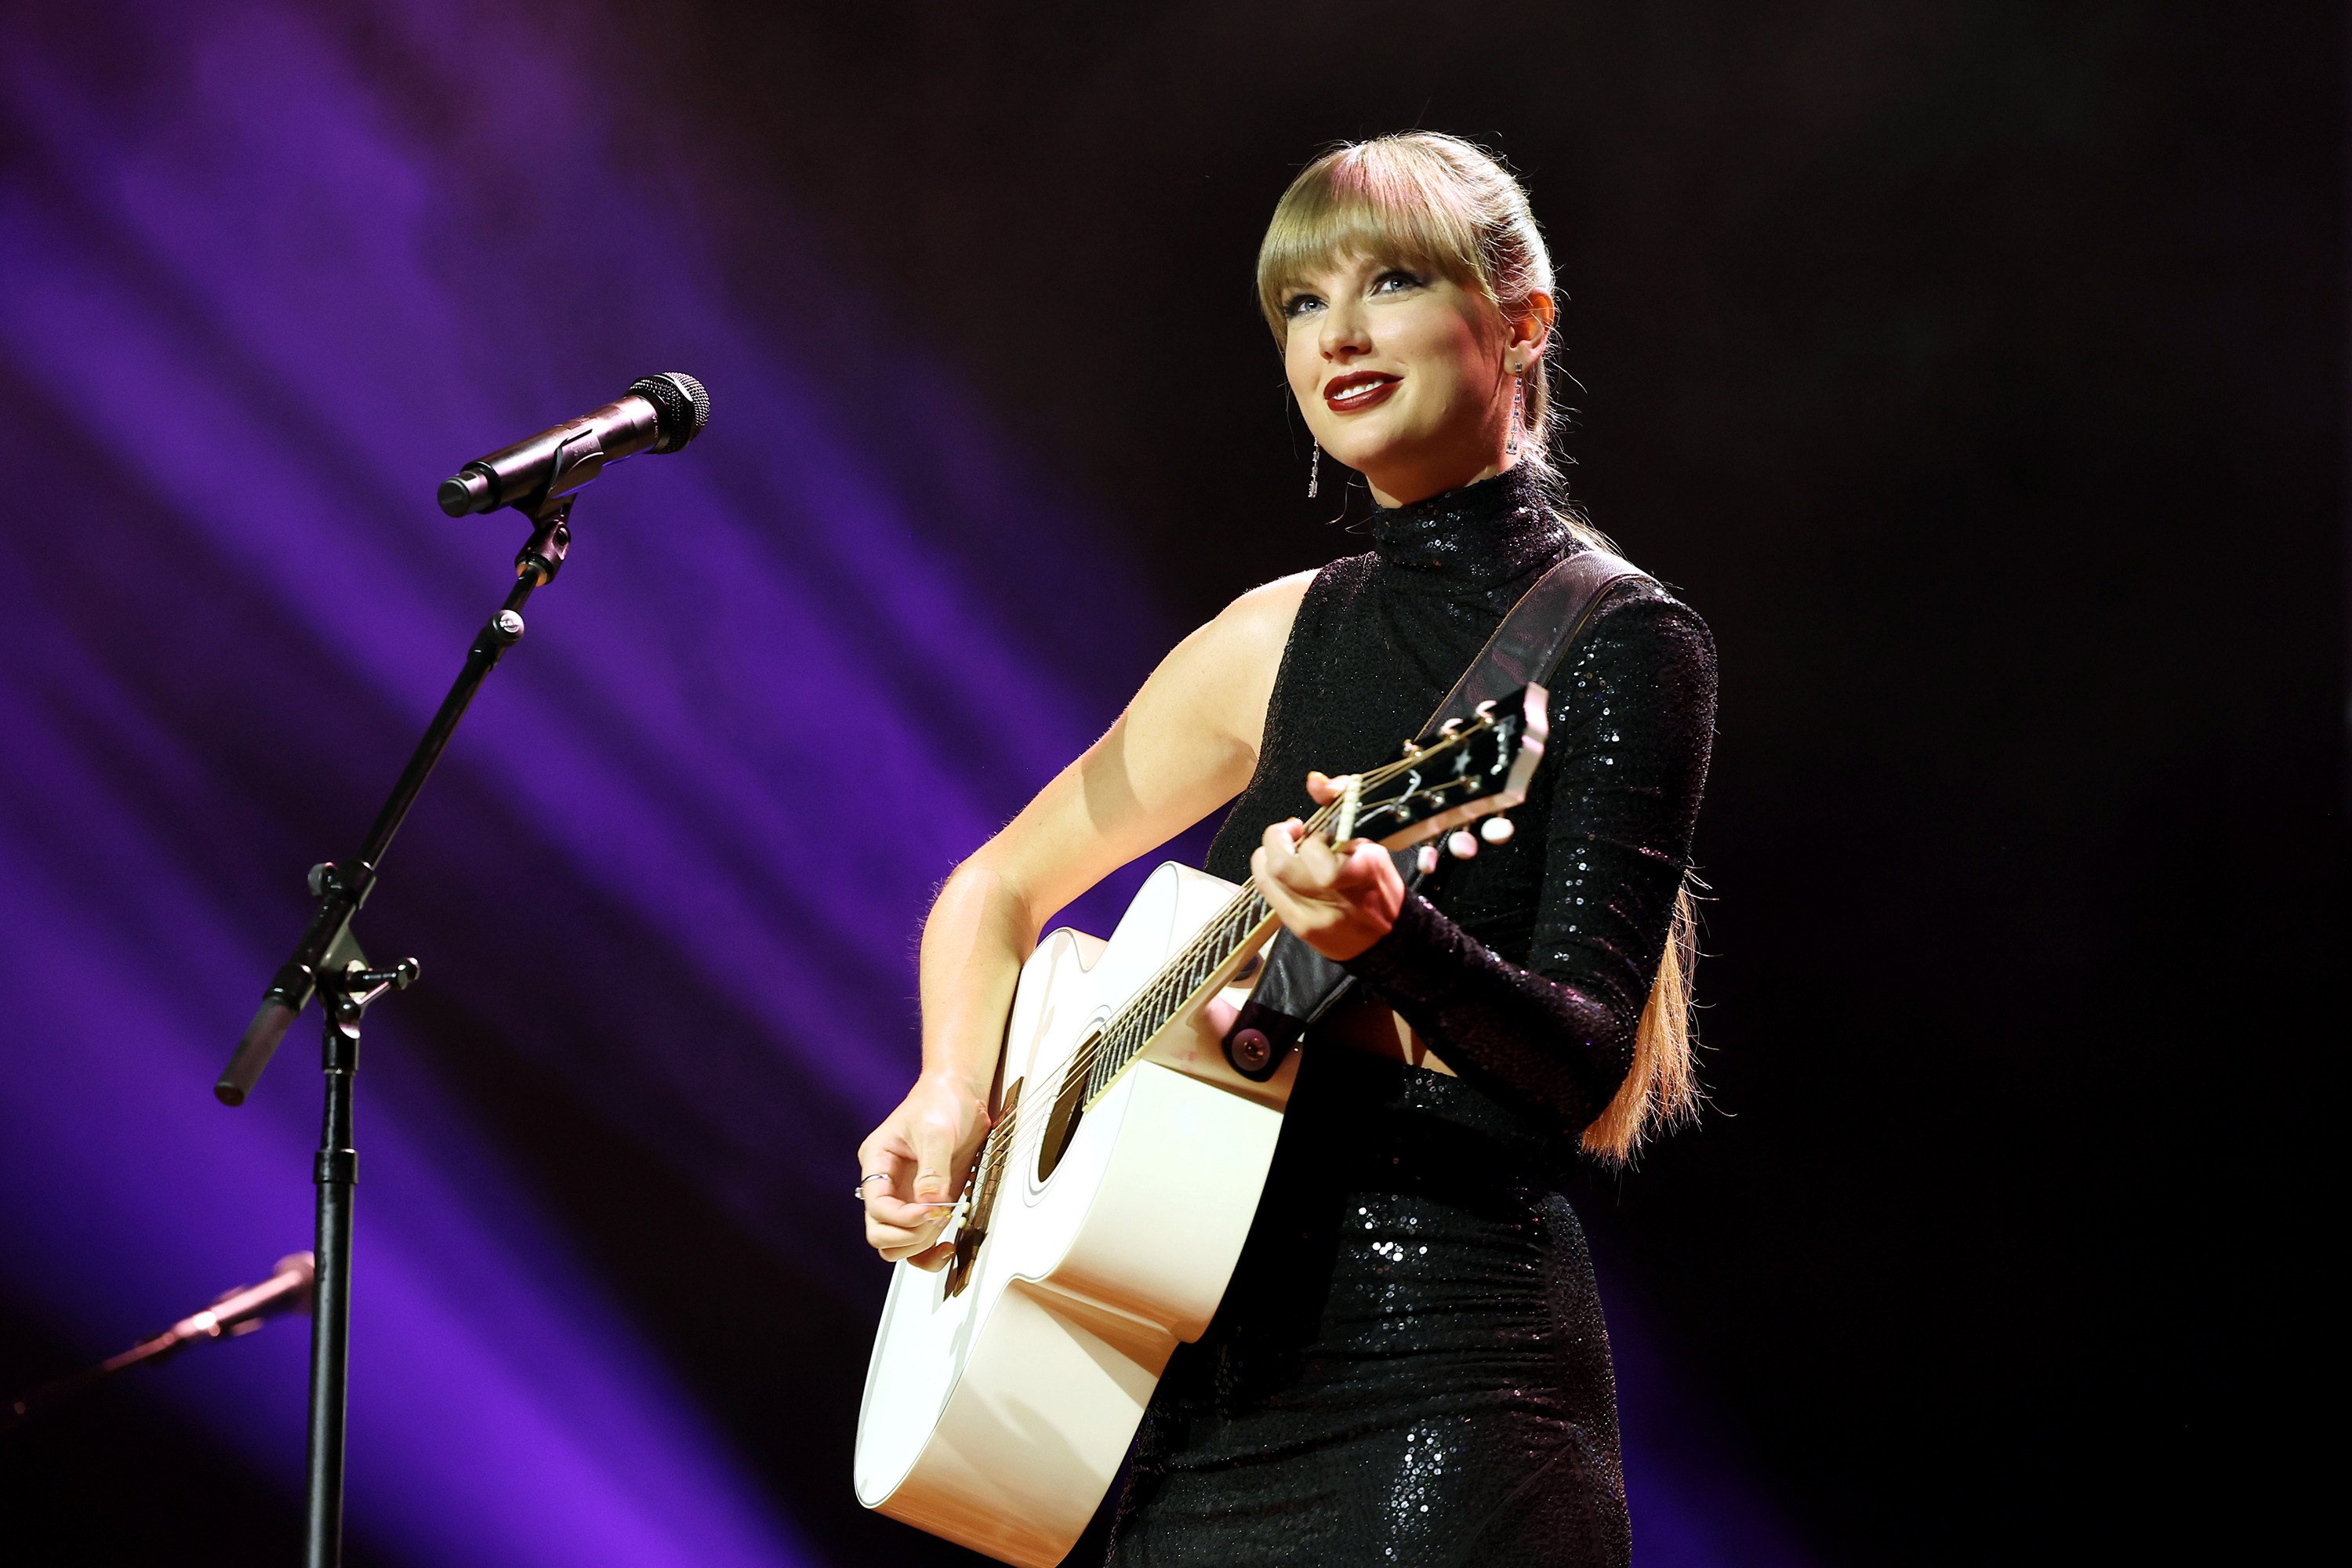 The “fastest fingers first” battle won’t be limited to Singapore residents; with Taylor Swift choosing to bypass the rest of Southeast Asia and Hong Kong, attendees in the queues are likely to be from across the region. Photo: TNS